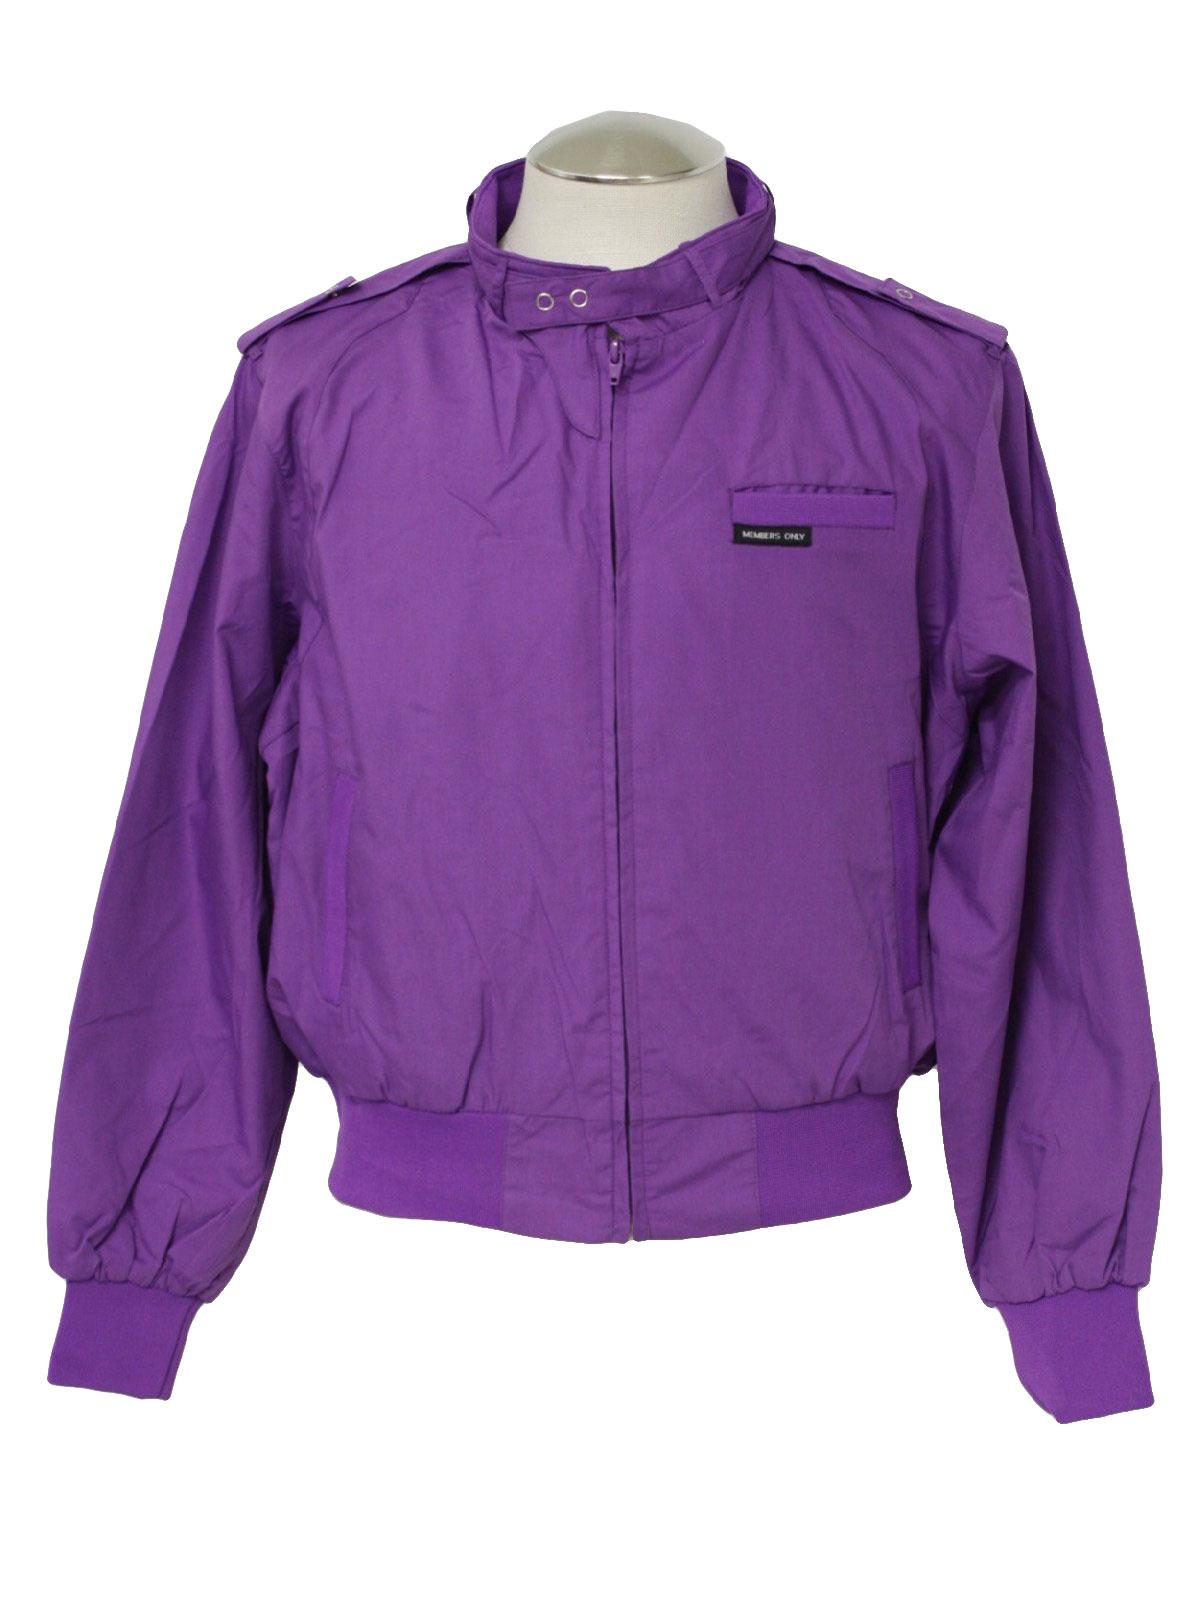 80's Vintage Jacket: 80s style -Members Only- Womens purple polyester ...